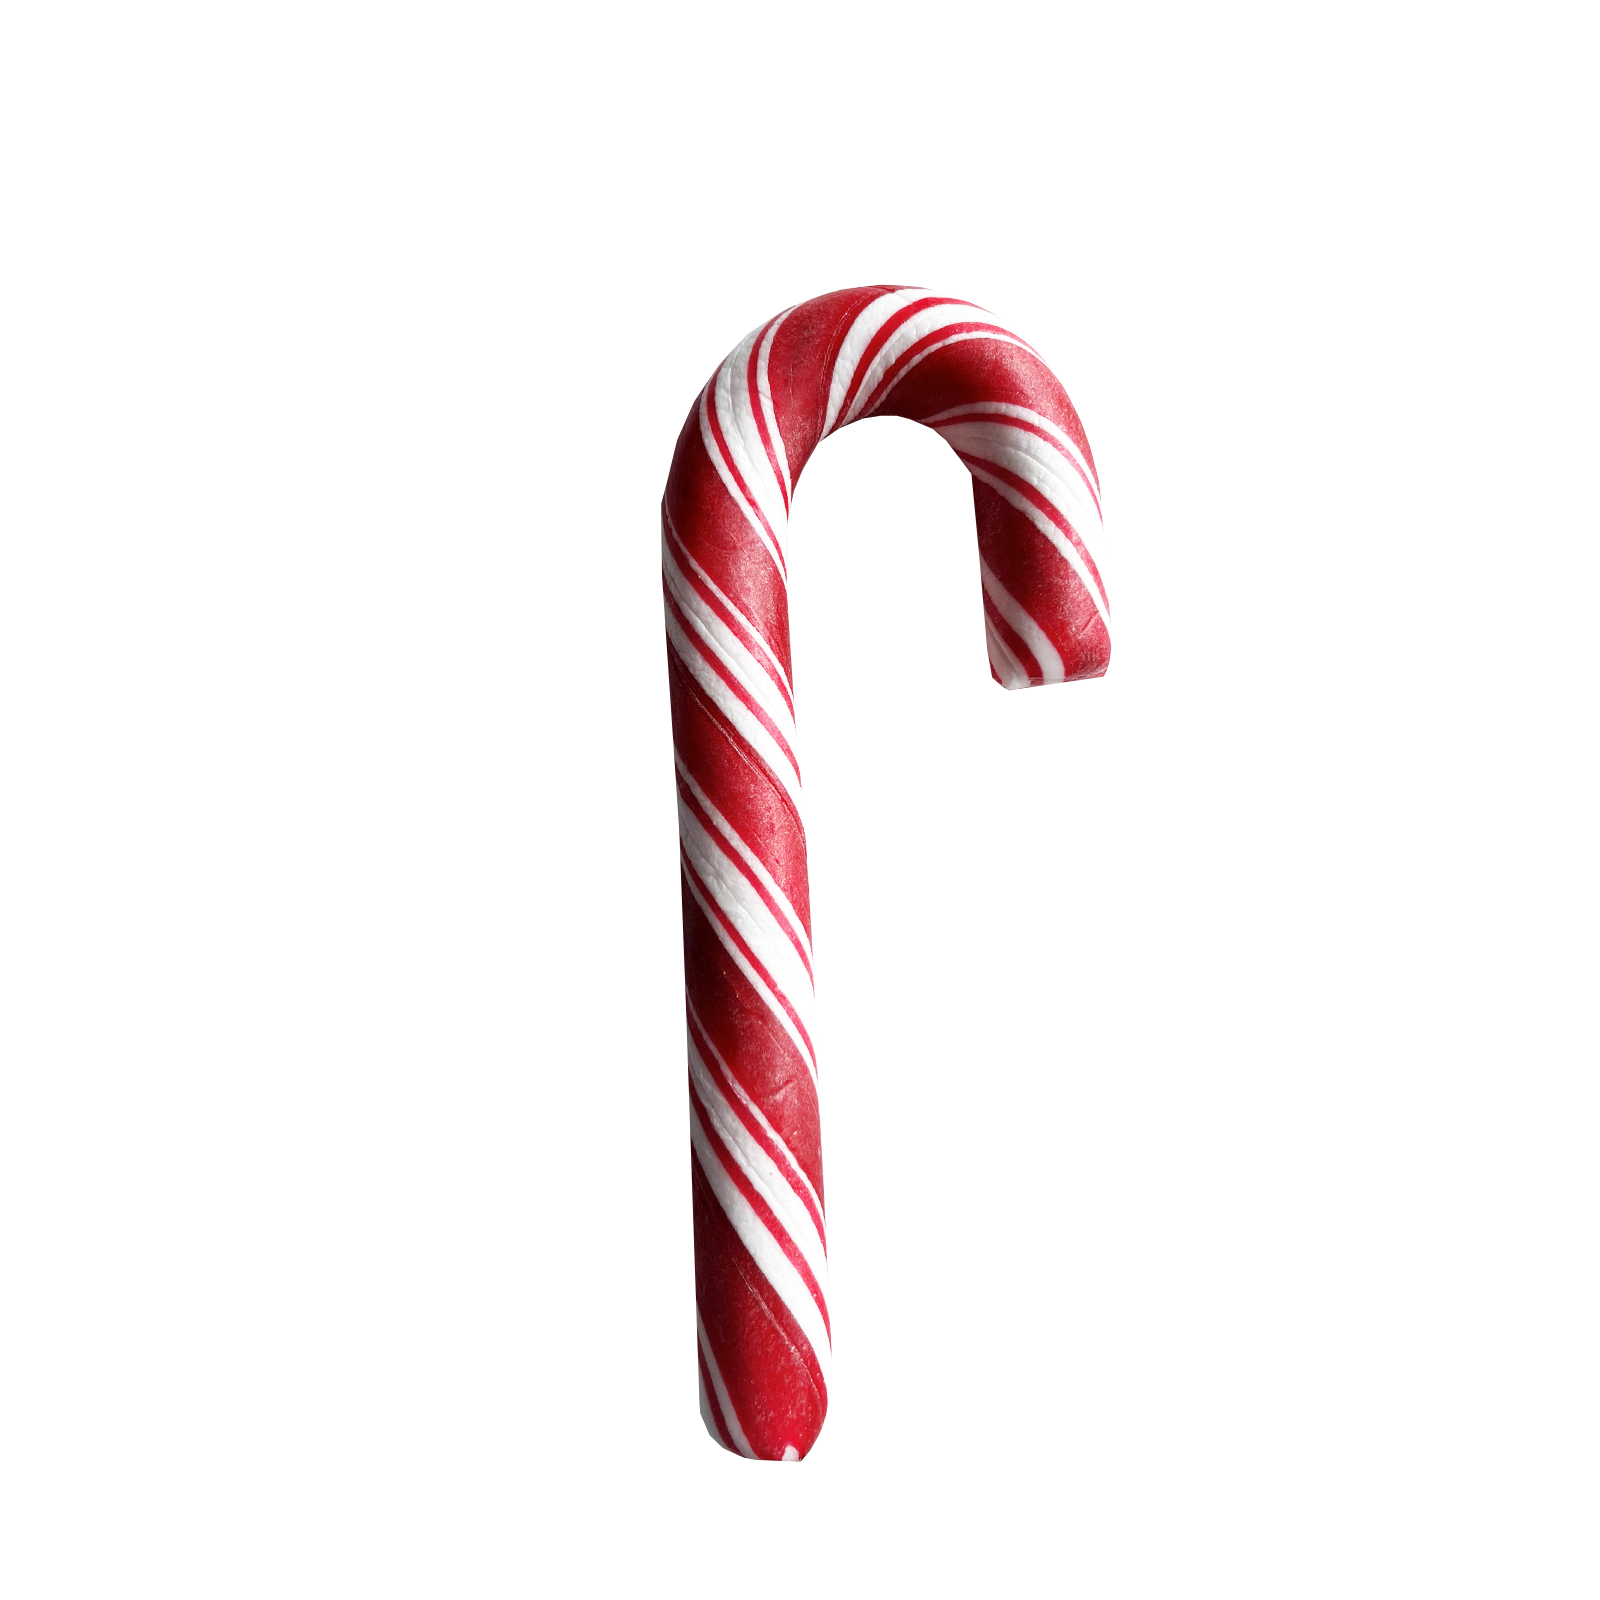 Candy Canes PNG Photos